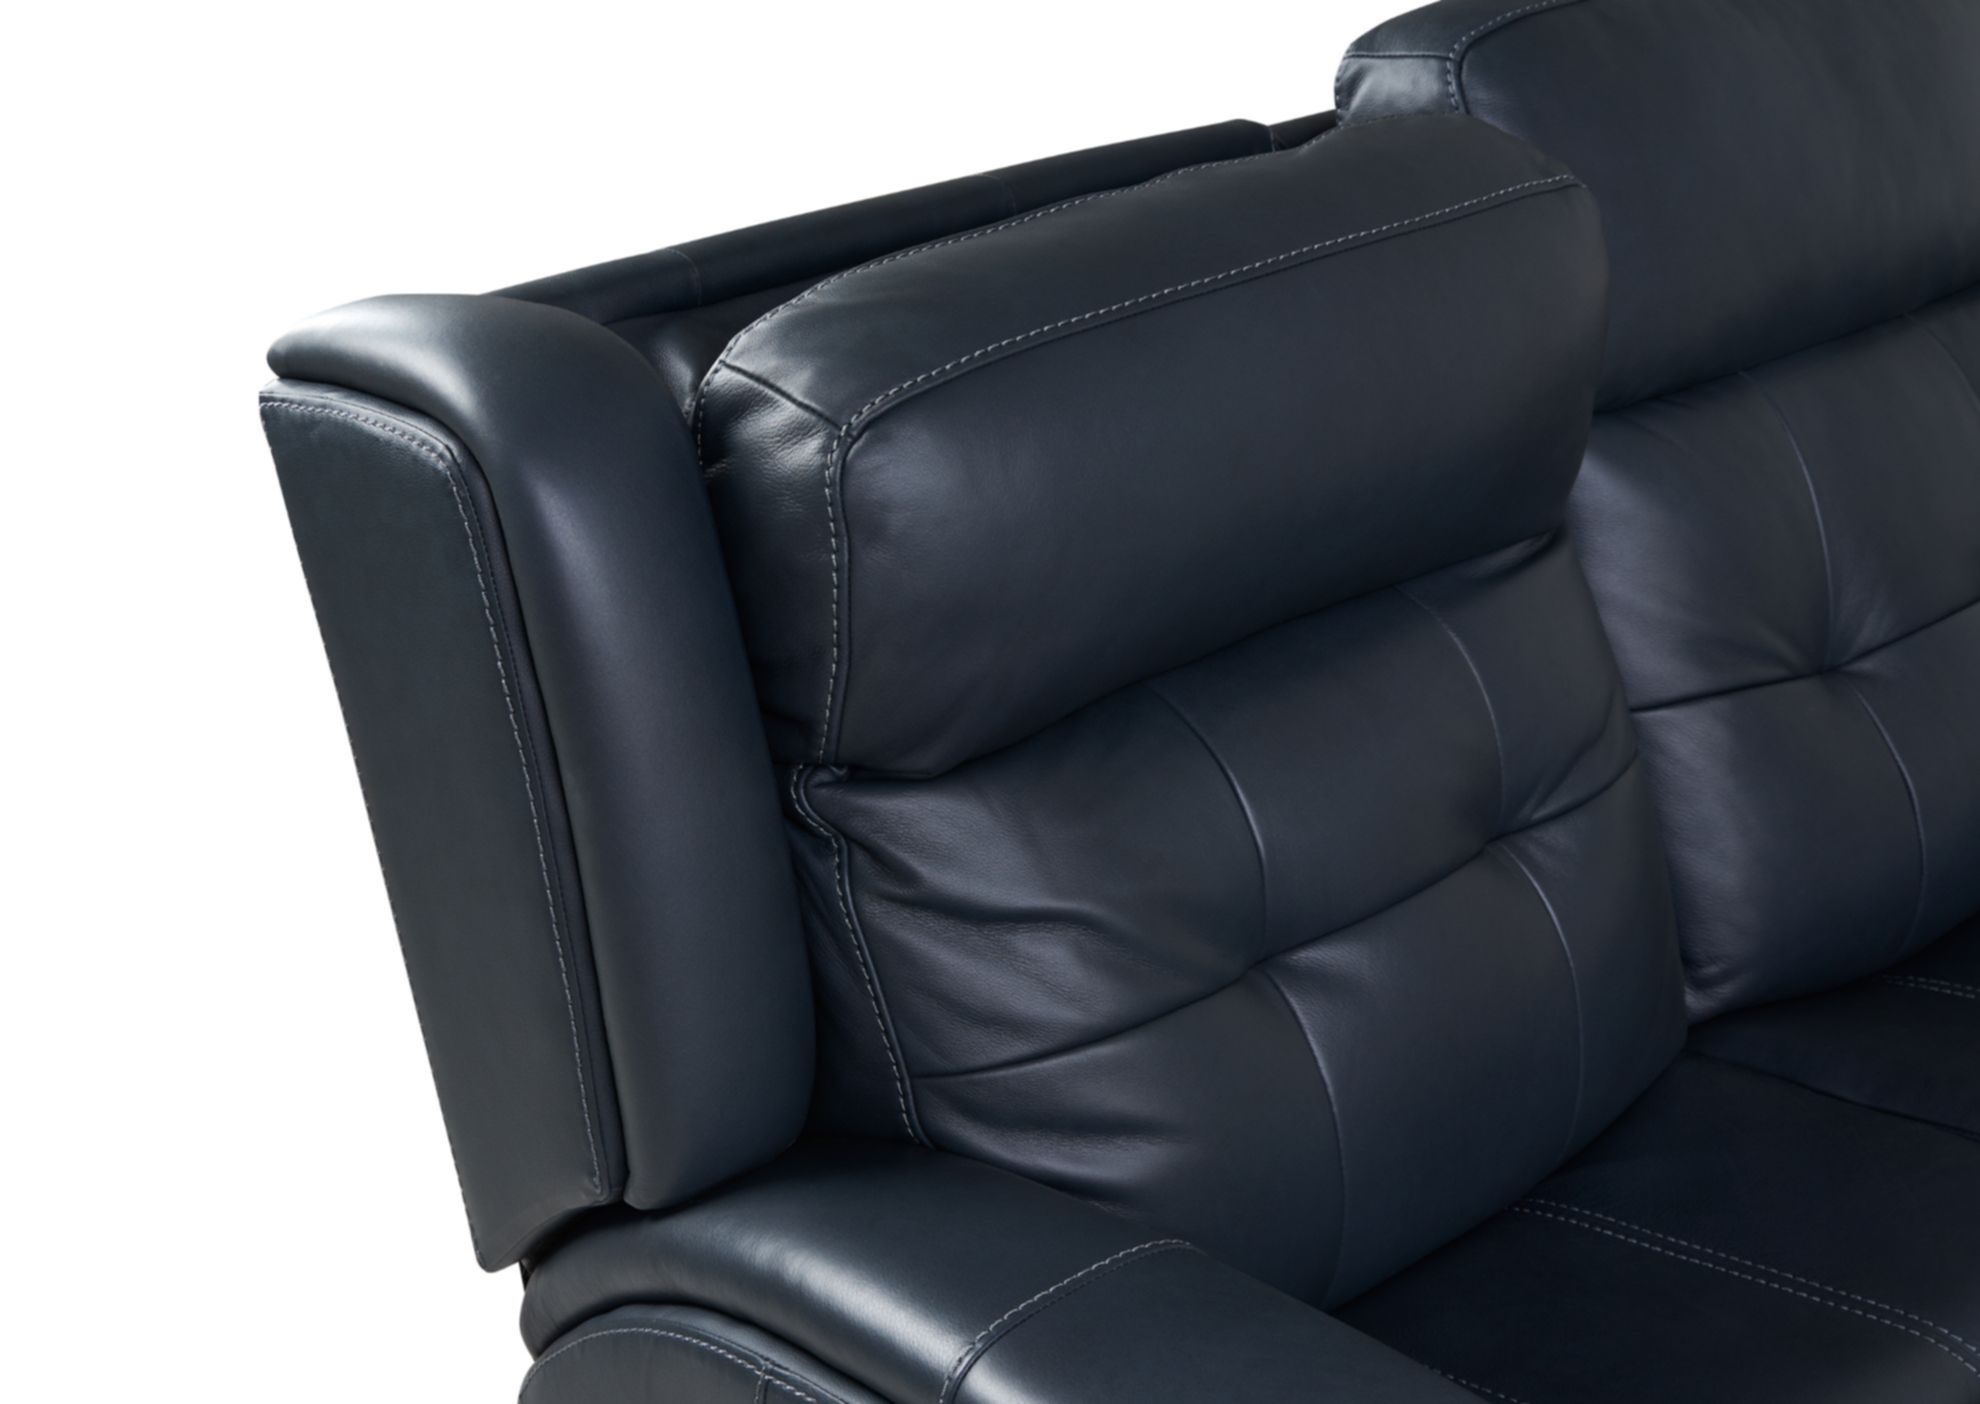 Picture of Grant Power Recline Sofa